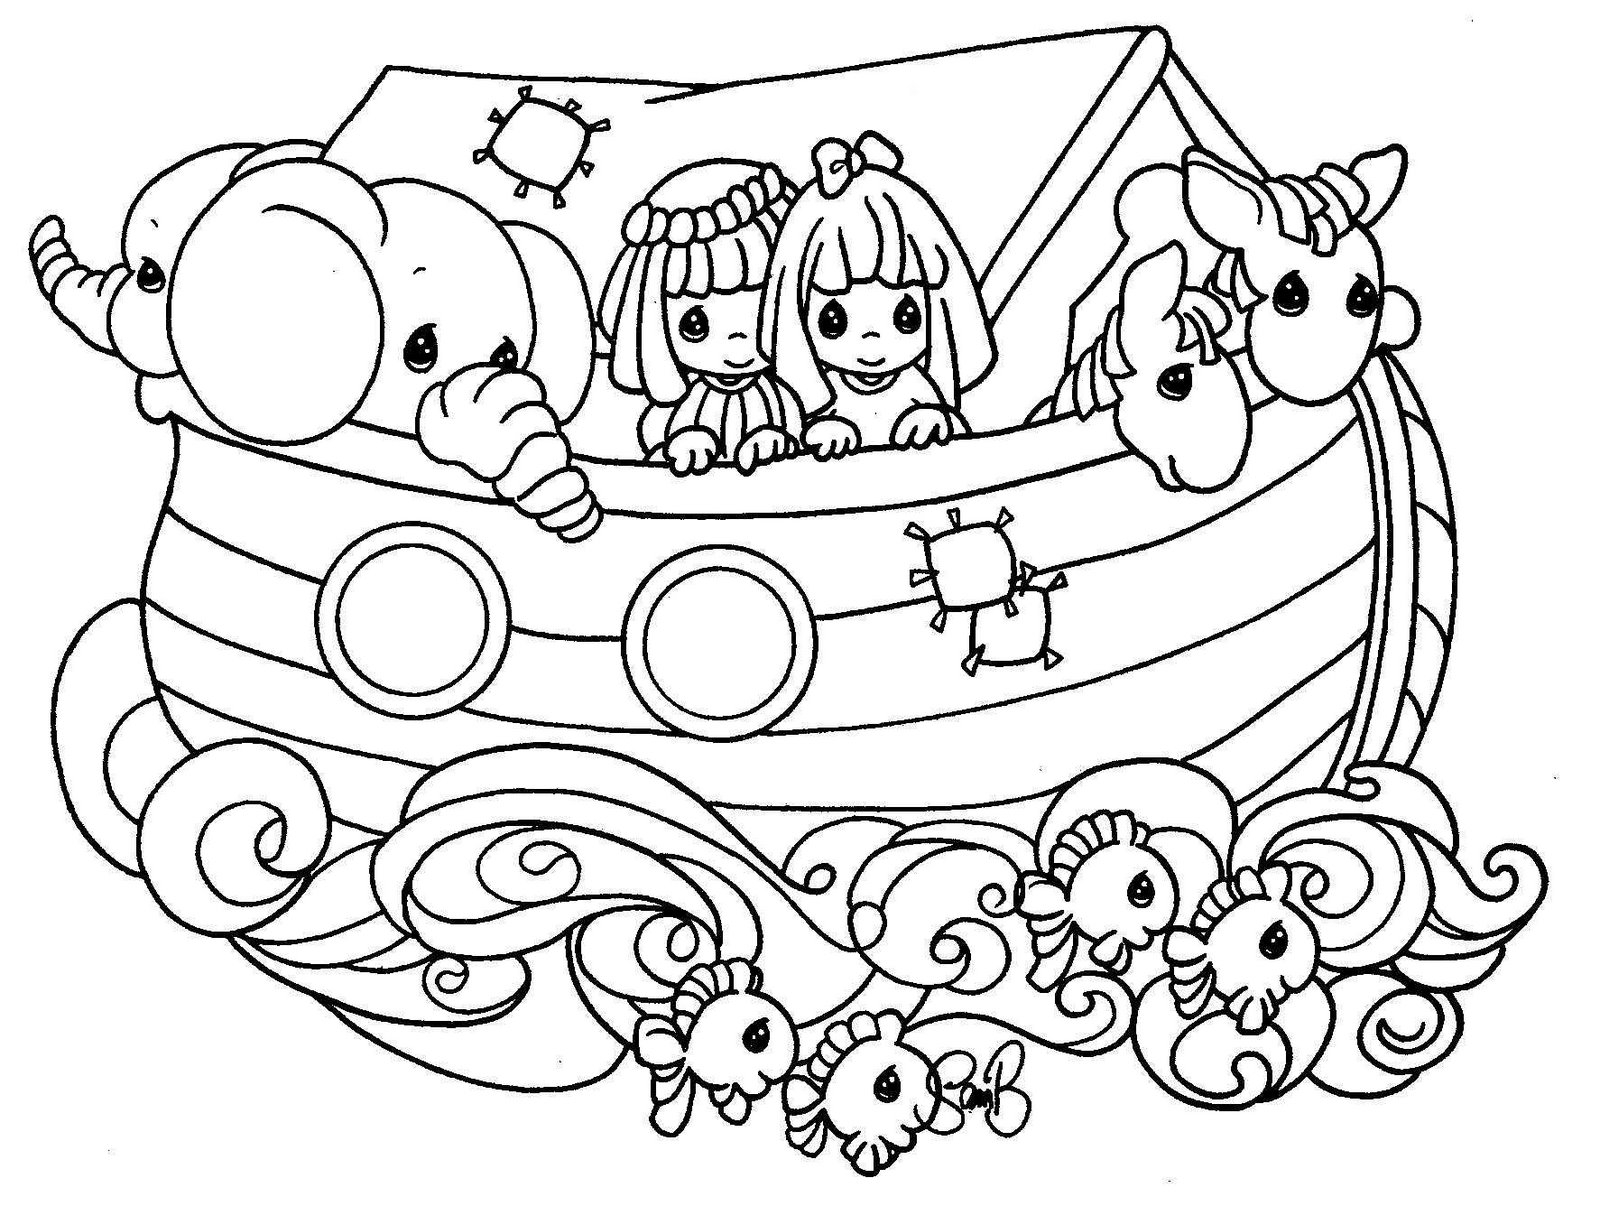 Noahs Ark Printable Coloring Pages at Free printable